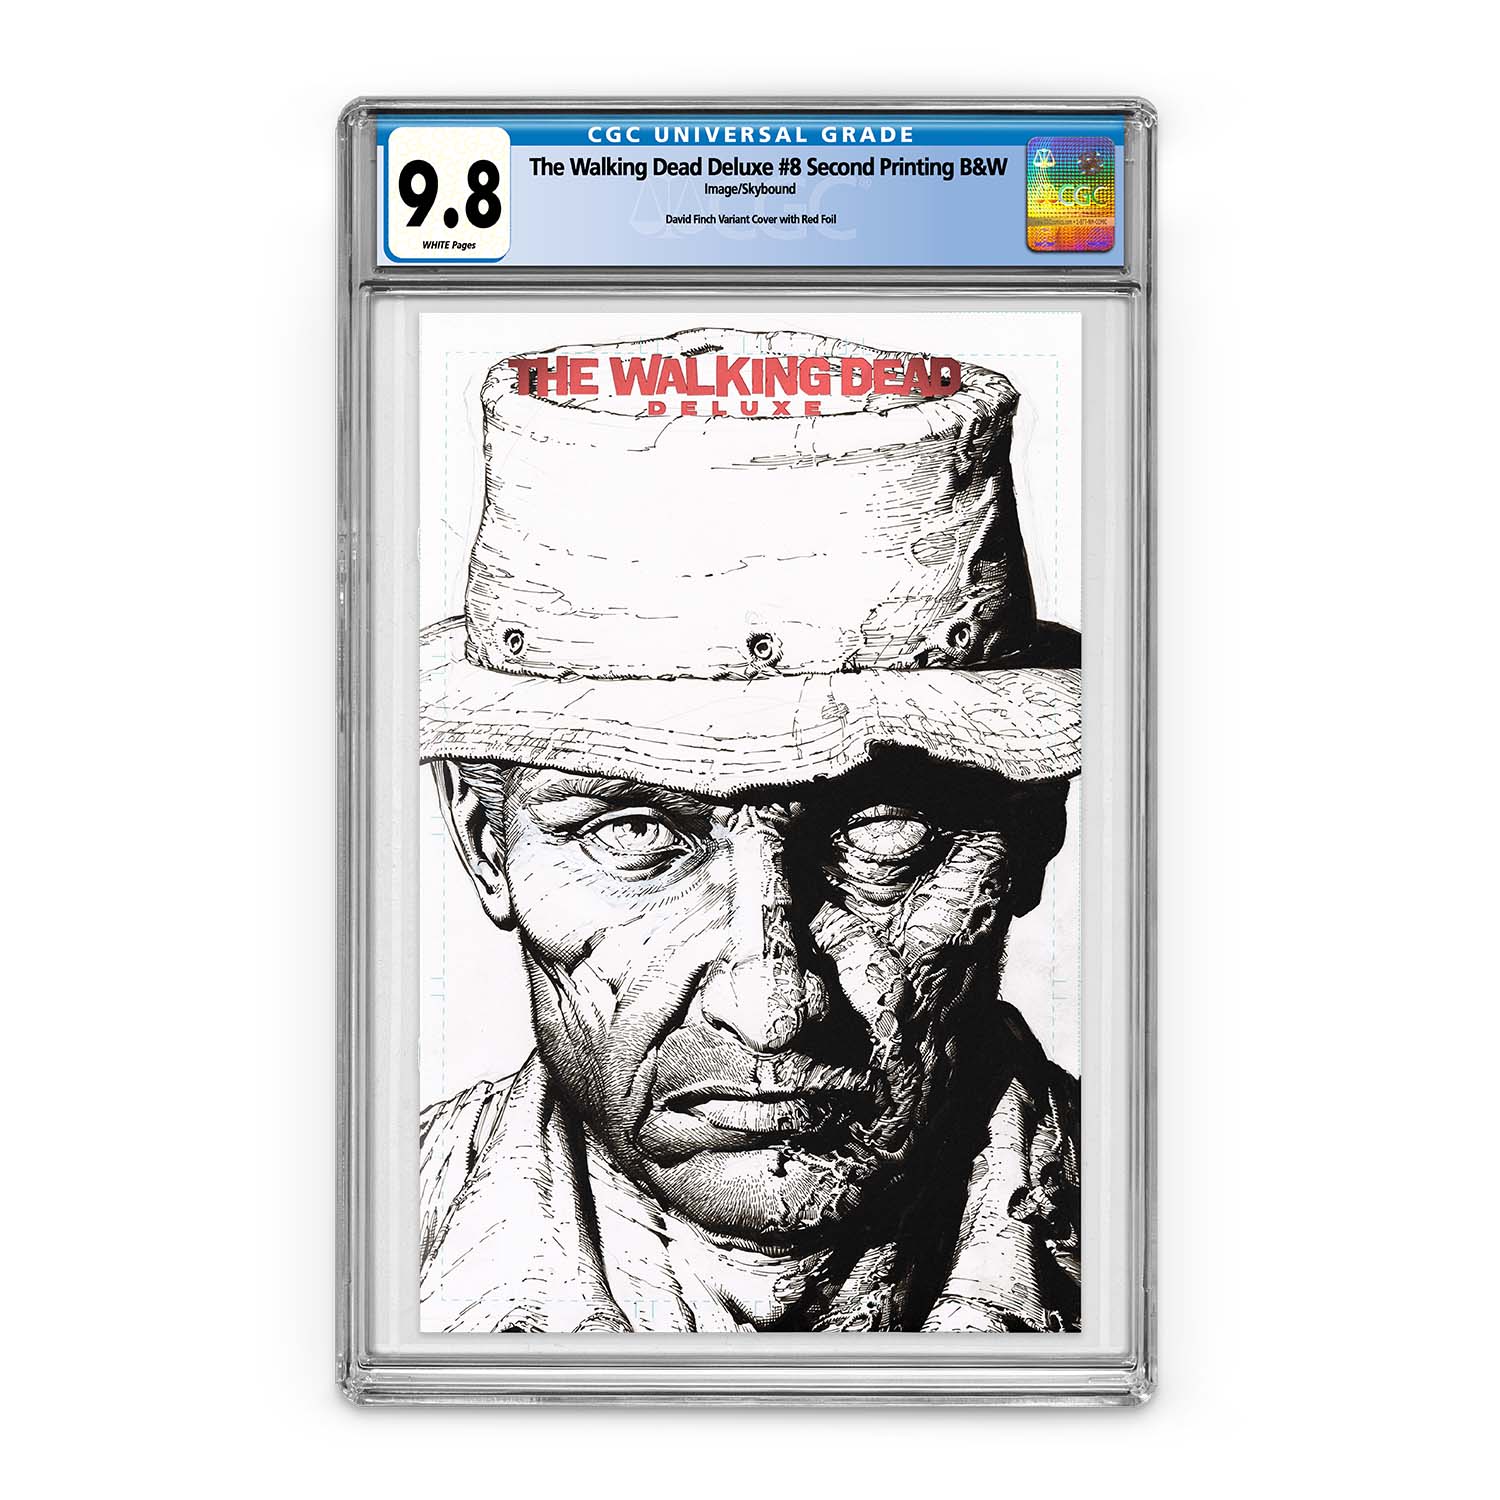 The Walking Dead Deluxe #8 Second Printing B&W with Red Foil Logo - CGC 9.8